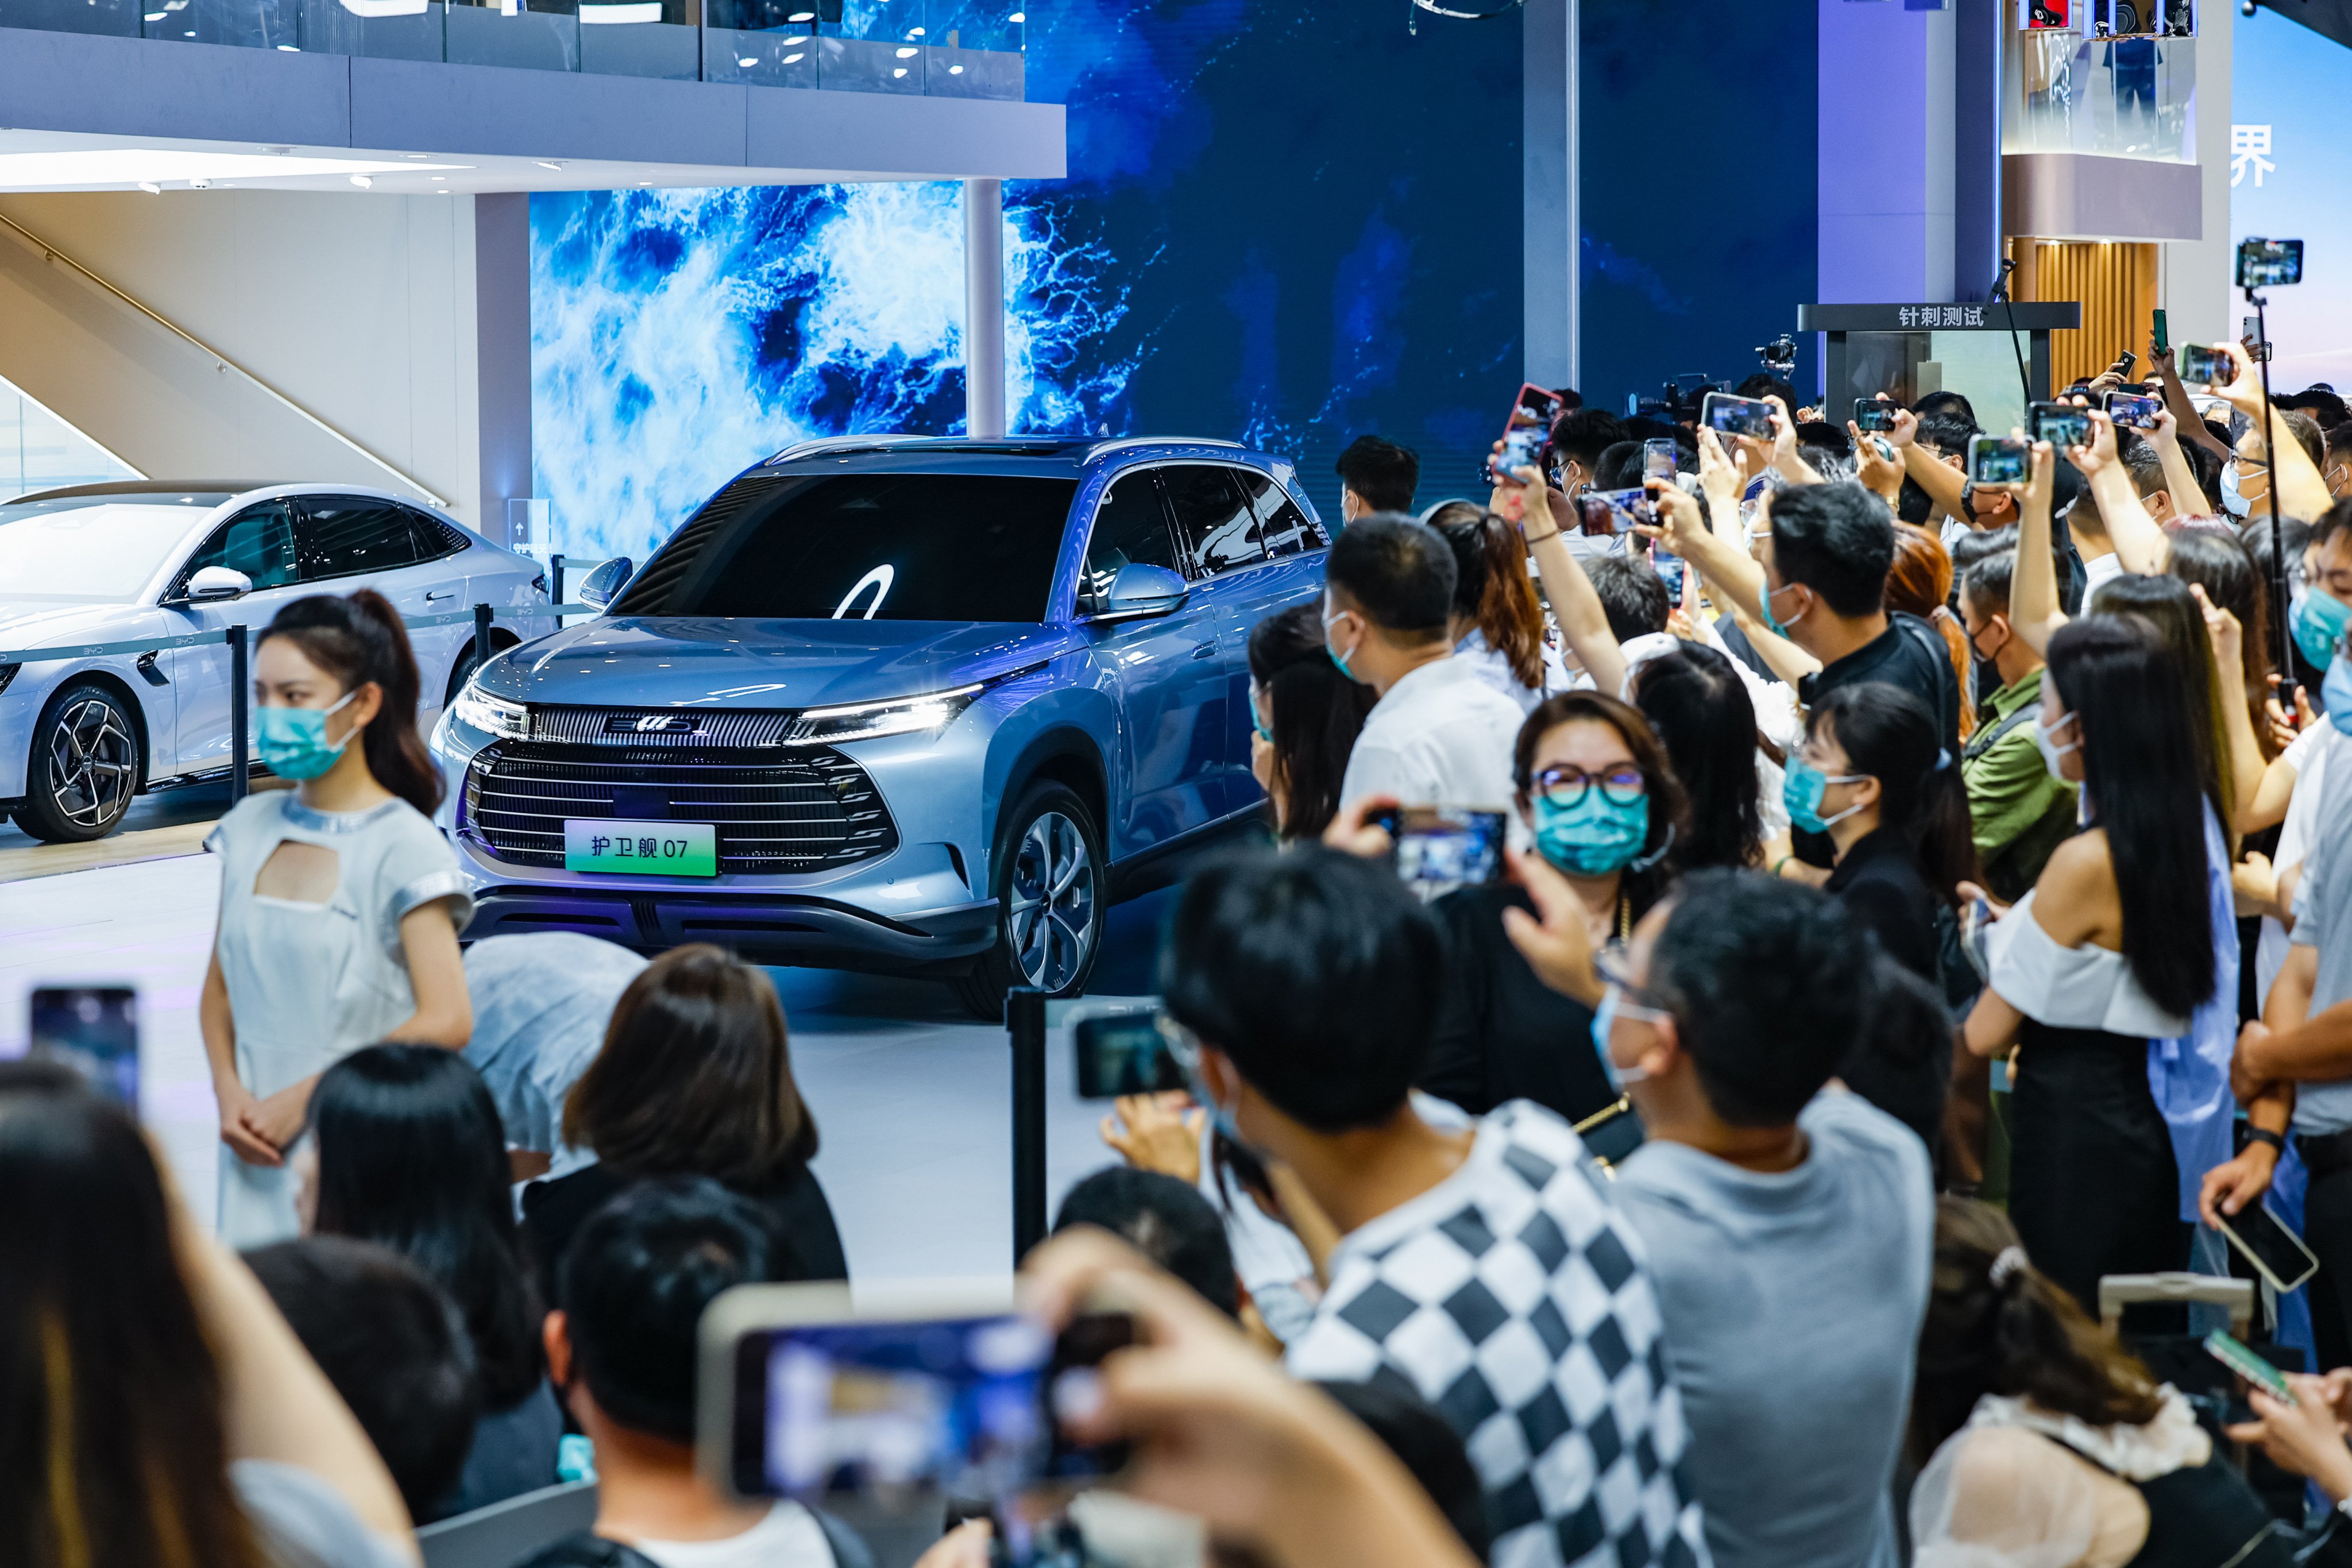 Visitors take photos of a car from BYD at the Chengdu Motor Show in August this year. The carmaker reported a 142 per cent jump in year-on-year sales last month. Photo: Xinhua